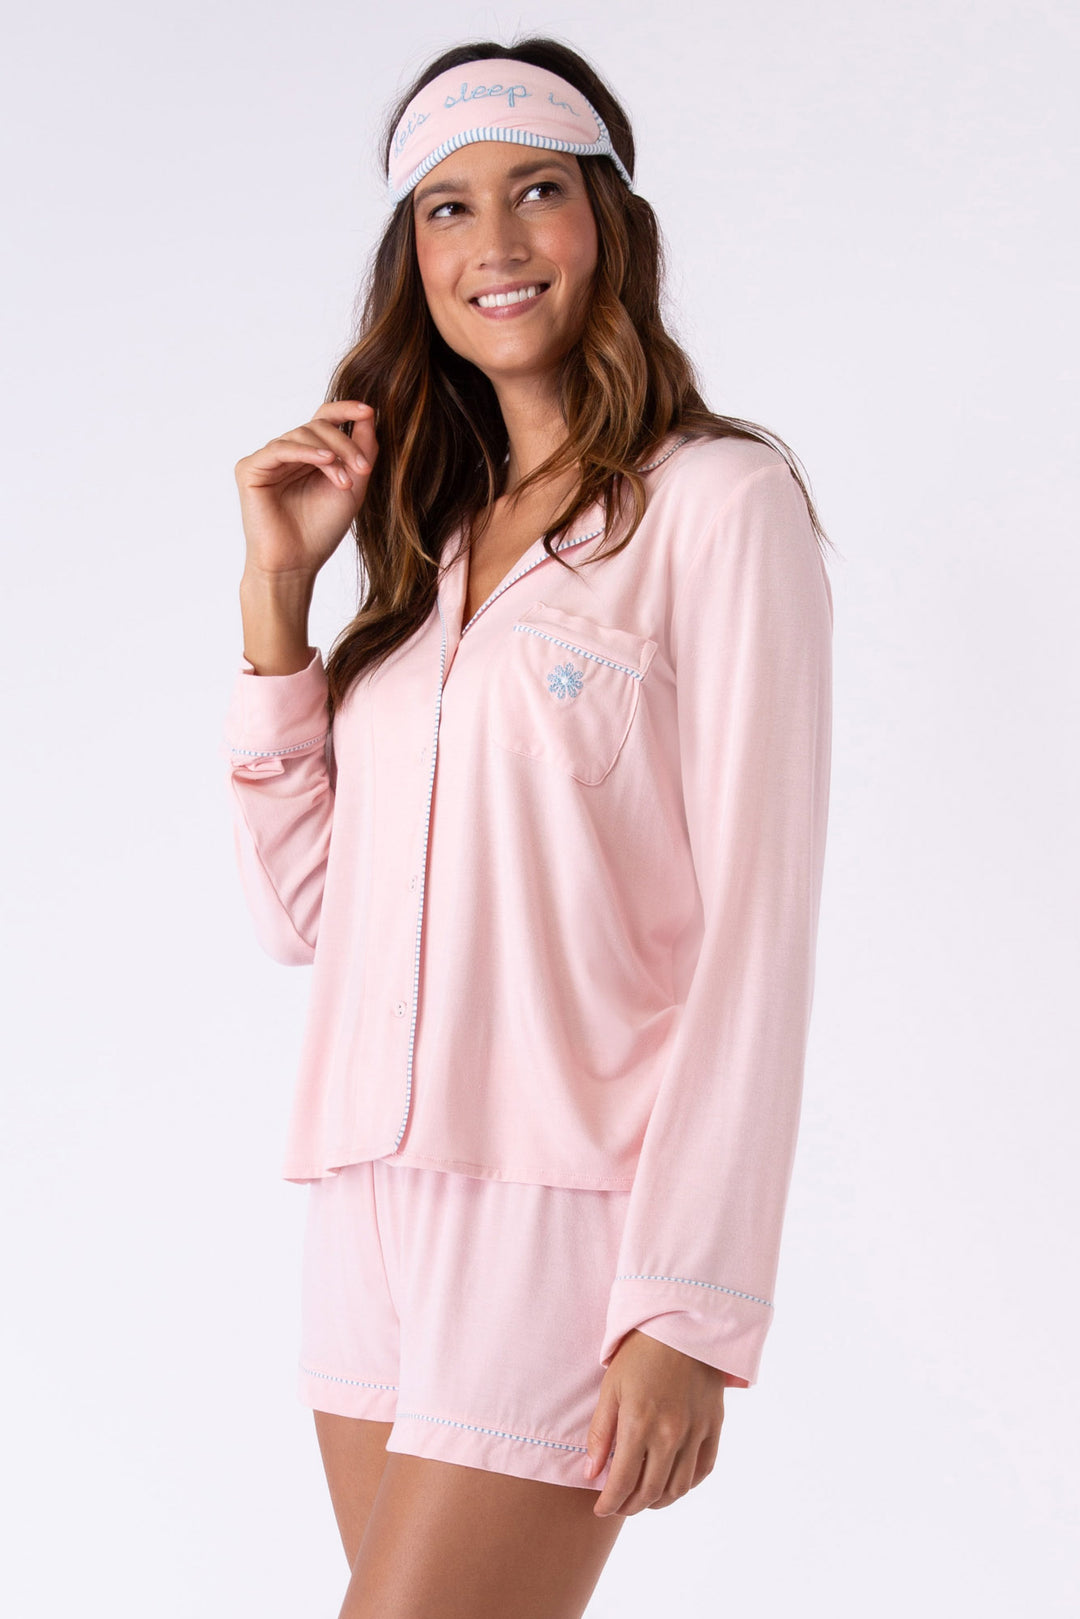 Pink PJ set long sleeve button top & short with striped piping. With embroidered sleep mask "Let's Sleep in".